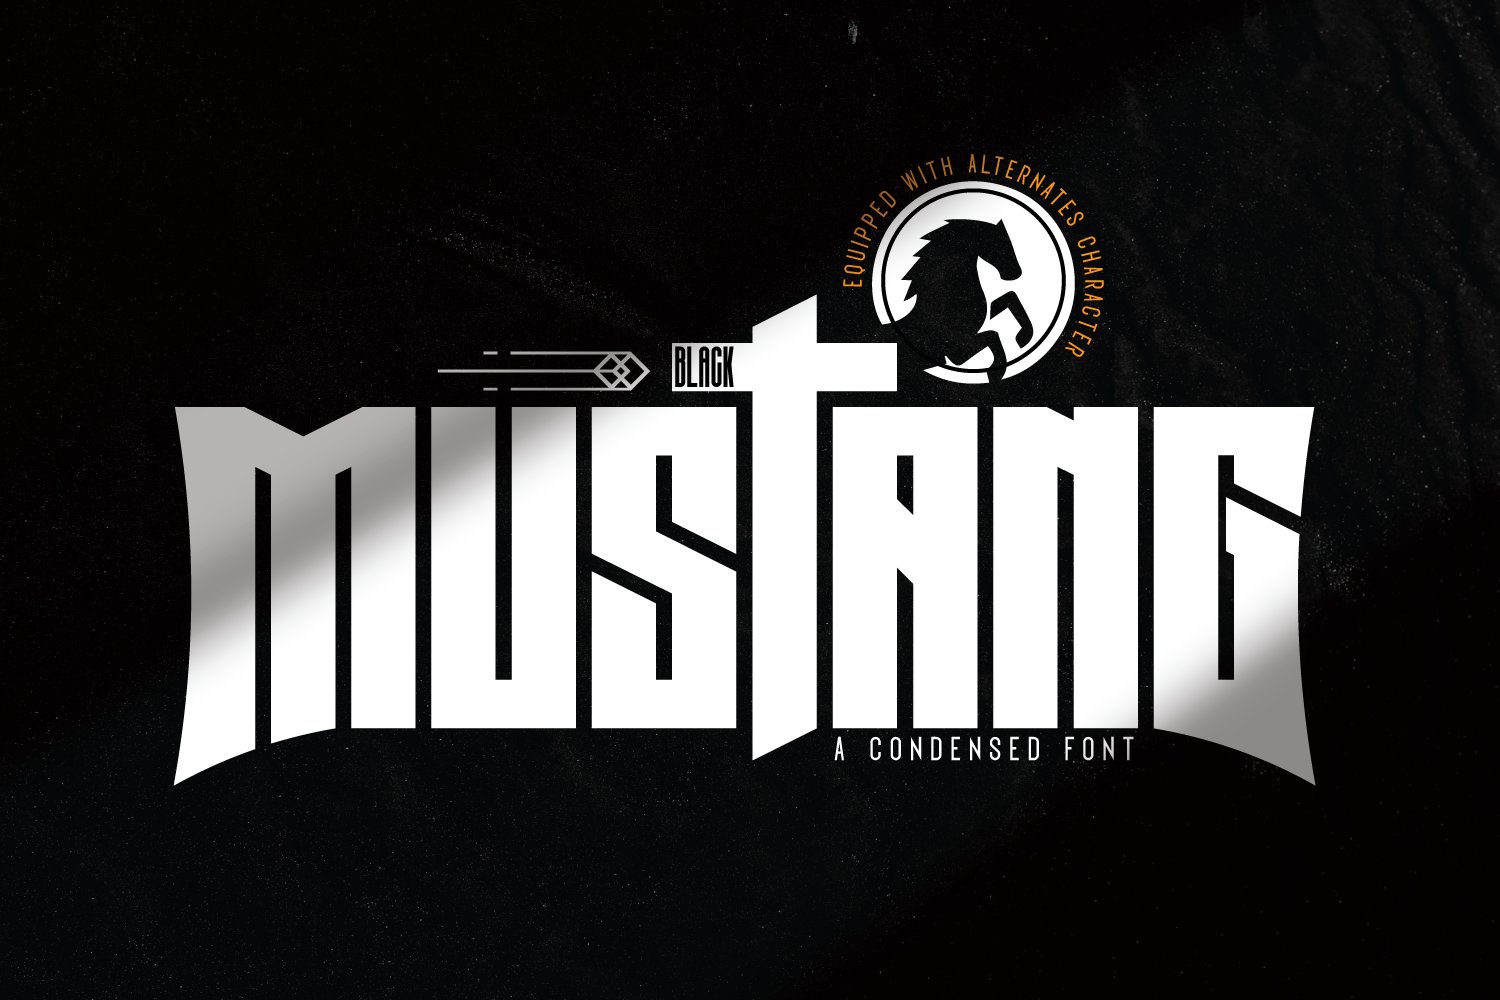 Black Mustang cover image.